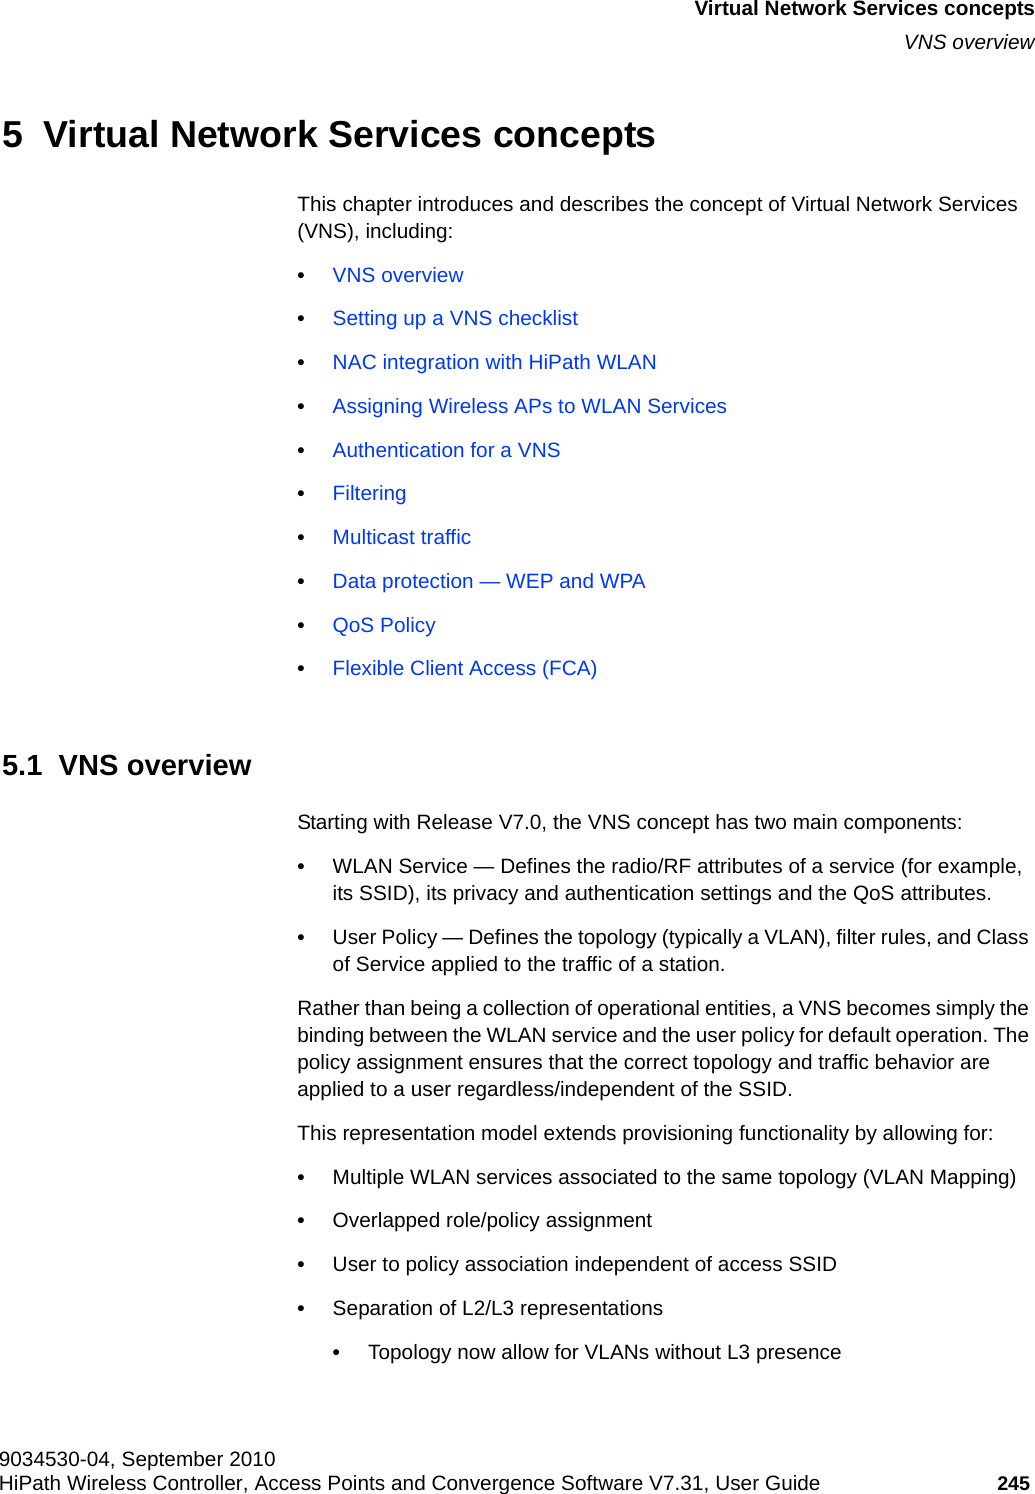 hwc_vnsintro.fm9034530-04, September 2010HiPath Wireless Controller, Access Points and Convergence Software V7.31, User Guide 245      Virtual Network Services conceptsVNS overview5  Virtual Network Services conceptsThis chapter introduces and describes the concept of Virtual Network Services (VNS), including:•VNS overview•Setting up a VNS checklist•NAC integration with HiPath WLAN•Assigning Wireless APs to WLAN Services•Authentication for a VNS•Filtering•Multicast traffic•Data protection — WEP and WPA•QoS Policy•Flexible Client Access (FCA)5.1  VNS overviewStarting with Release V7.0, the VNS concept has two main components:•WLAN Service — Defines the radio/RF attributes of a service (for example, its SSID), its privacy and authentication settings and the QoS attributes.•User Policy — Defines the topology (typically a VLAN), filter rules, and Class of Service applied to the traffic of a station.Rather than being a collection of operational entities, a VNS becomes simply the binding between the WLAN service and the user policy for default operation. The policy assignment ensures that the correct topology and traffic behavior are applied to a user regardless/independent of the SSID.This representation model extends provisioning functionality by allowing for:•Multiple WLAN services associated to the same topology (VLAN Mapping)•Overlapped role/policy assignment•User to policy association independent of access SSID •Separation of L2/L3 representations•Topology now allow for VLANs without L3 presence